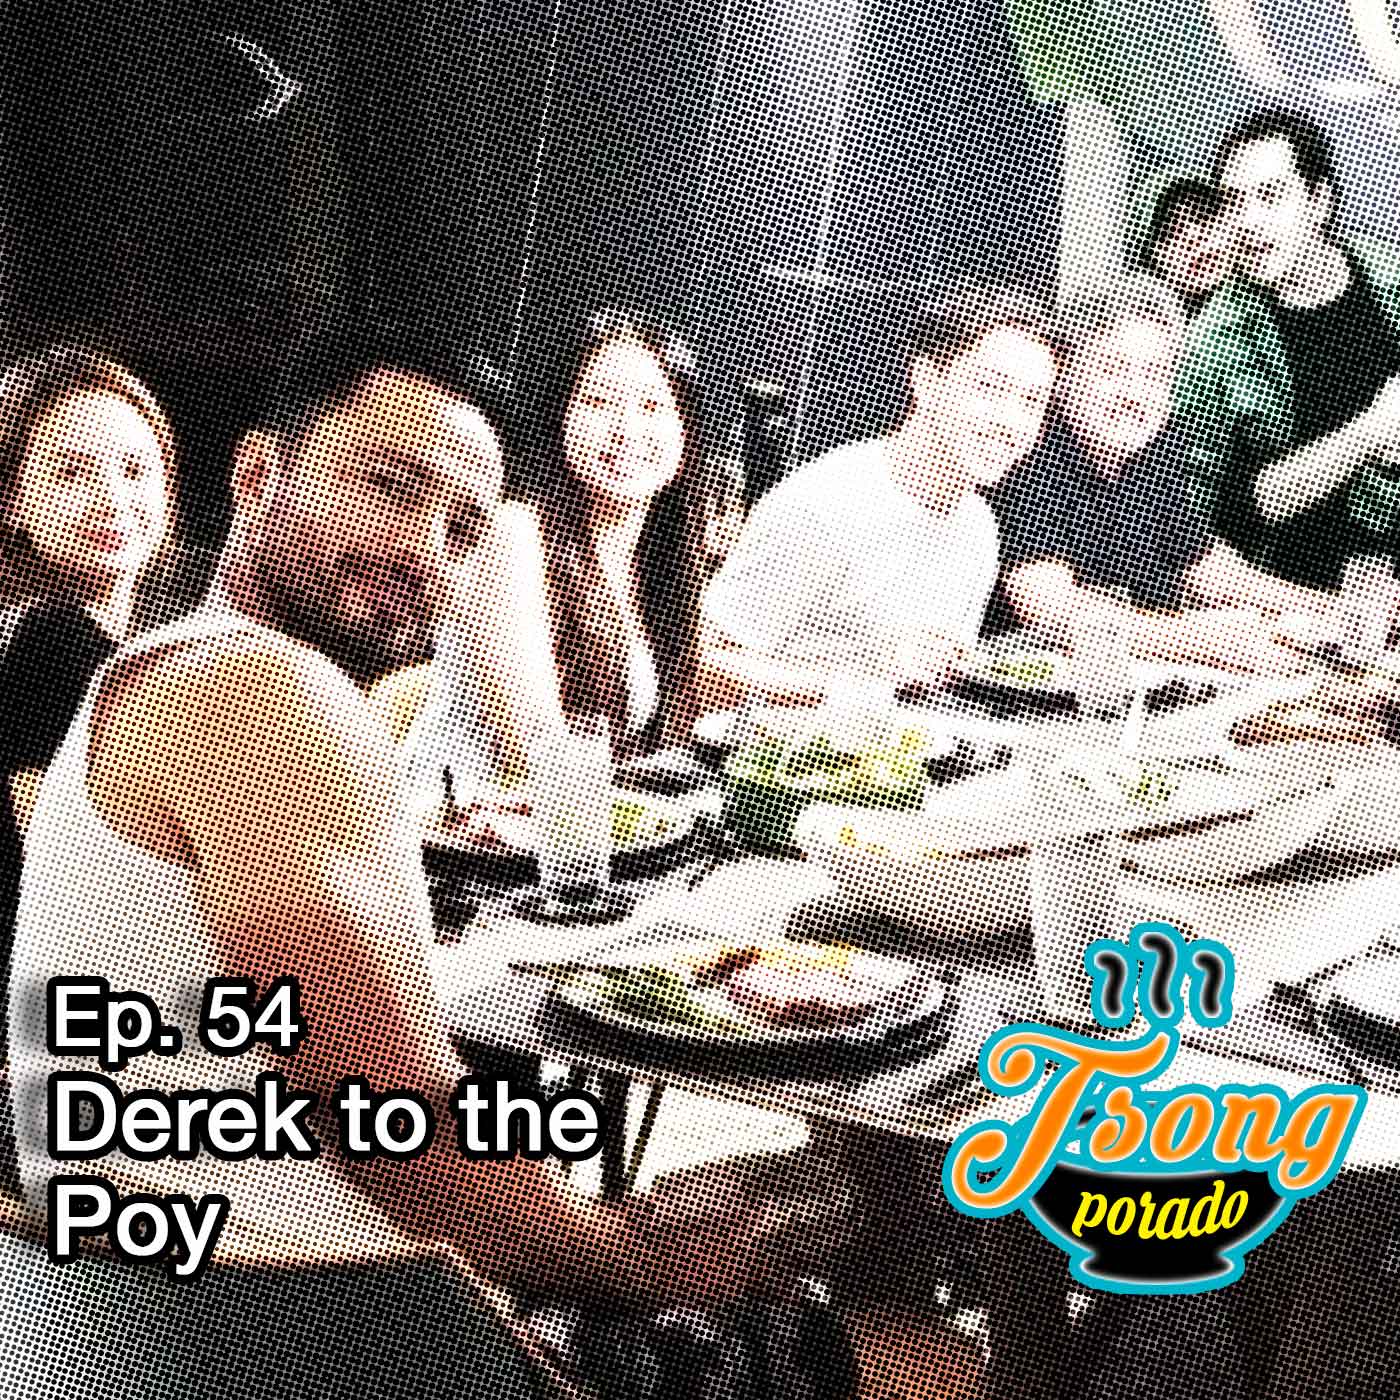 Ep. 54 - Derek to the Poy